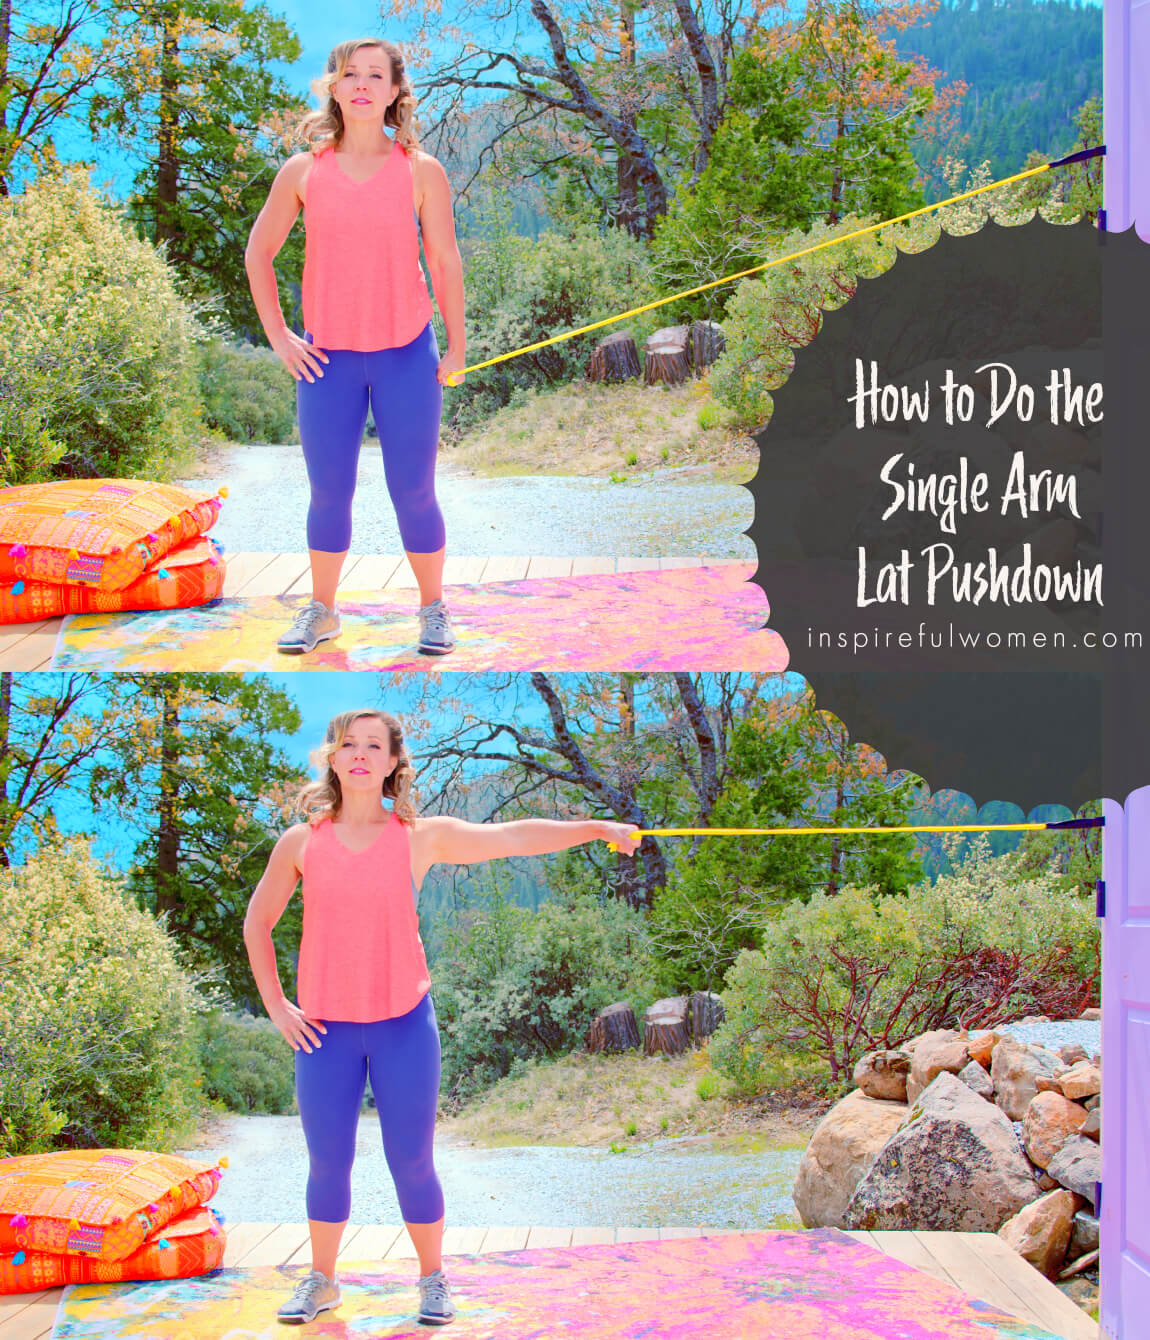 how-to-do-the-single-arm-lat-push-down-resistance-band-back-exercise-at-home-women-40+